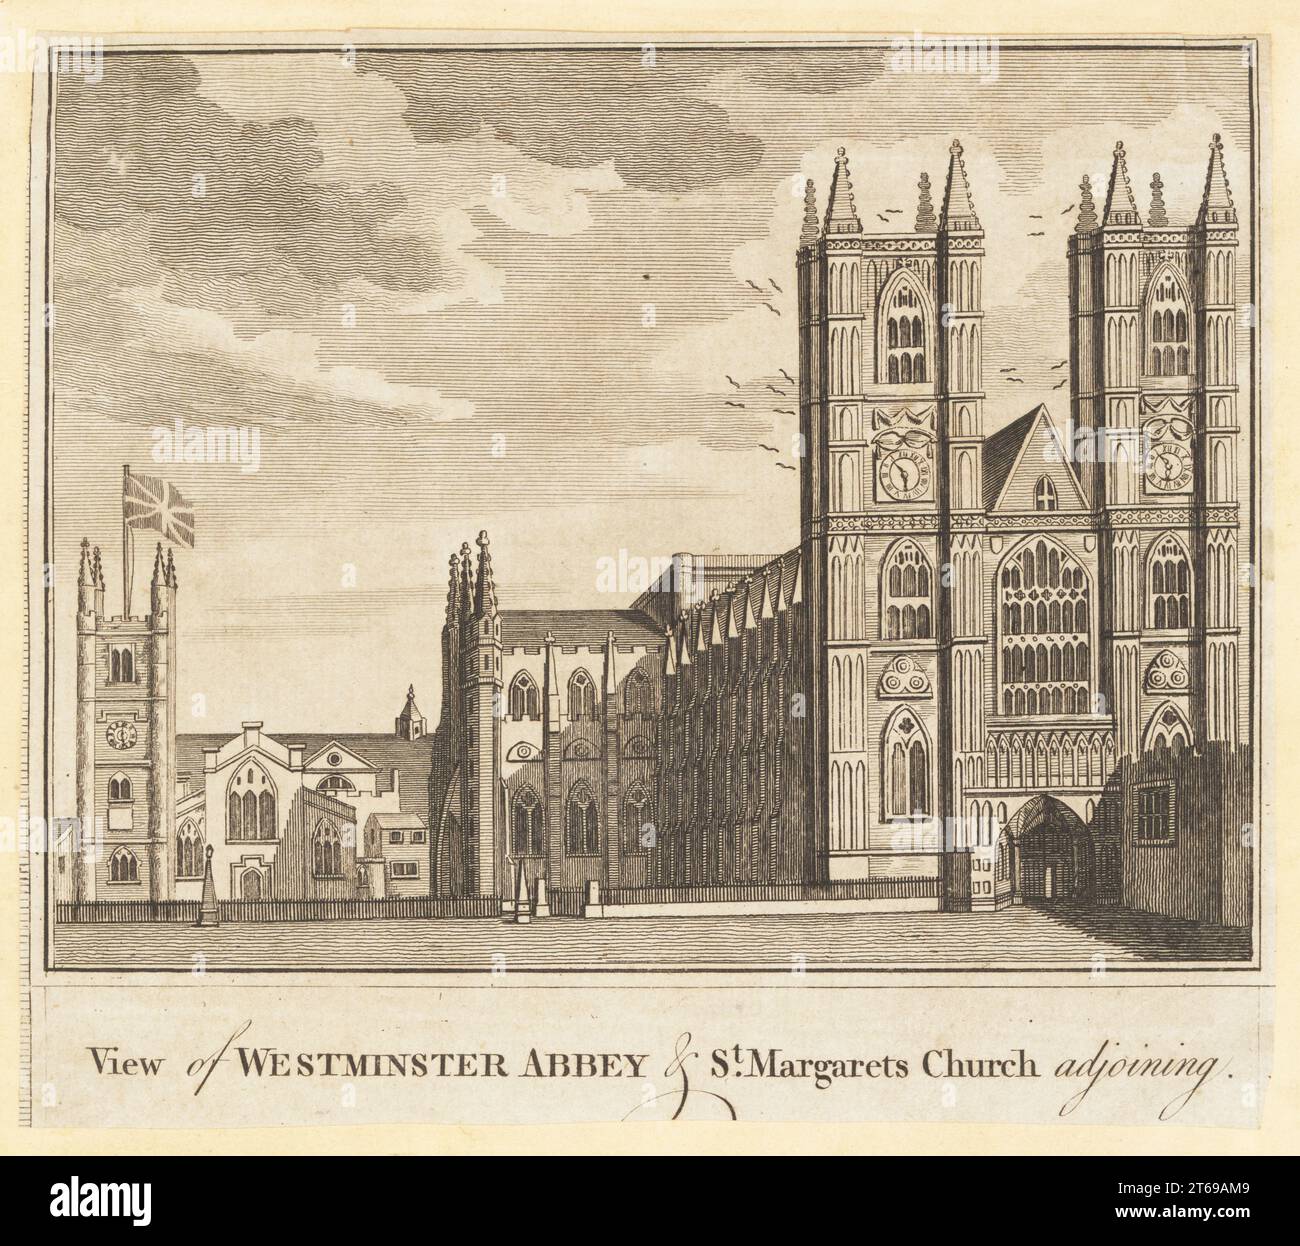 View of Westminster Abbey and St. Margarets Church adjoining. Copperplate engraving from William Thorntons New, Complete and Universal History of the City of London, Alexander Hogg, King's Arms, No. 16 Paternoster Row, London, 1784. Stock Photo